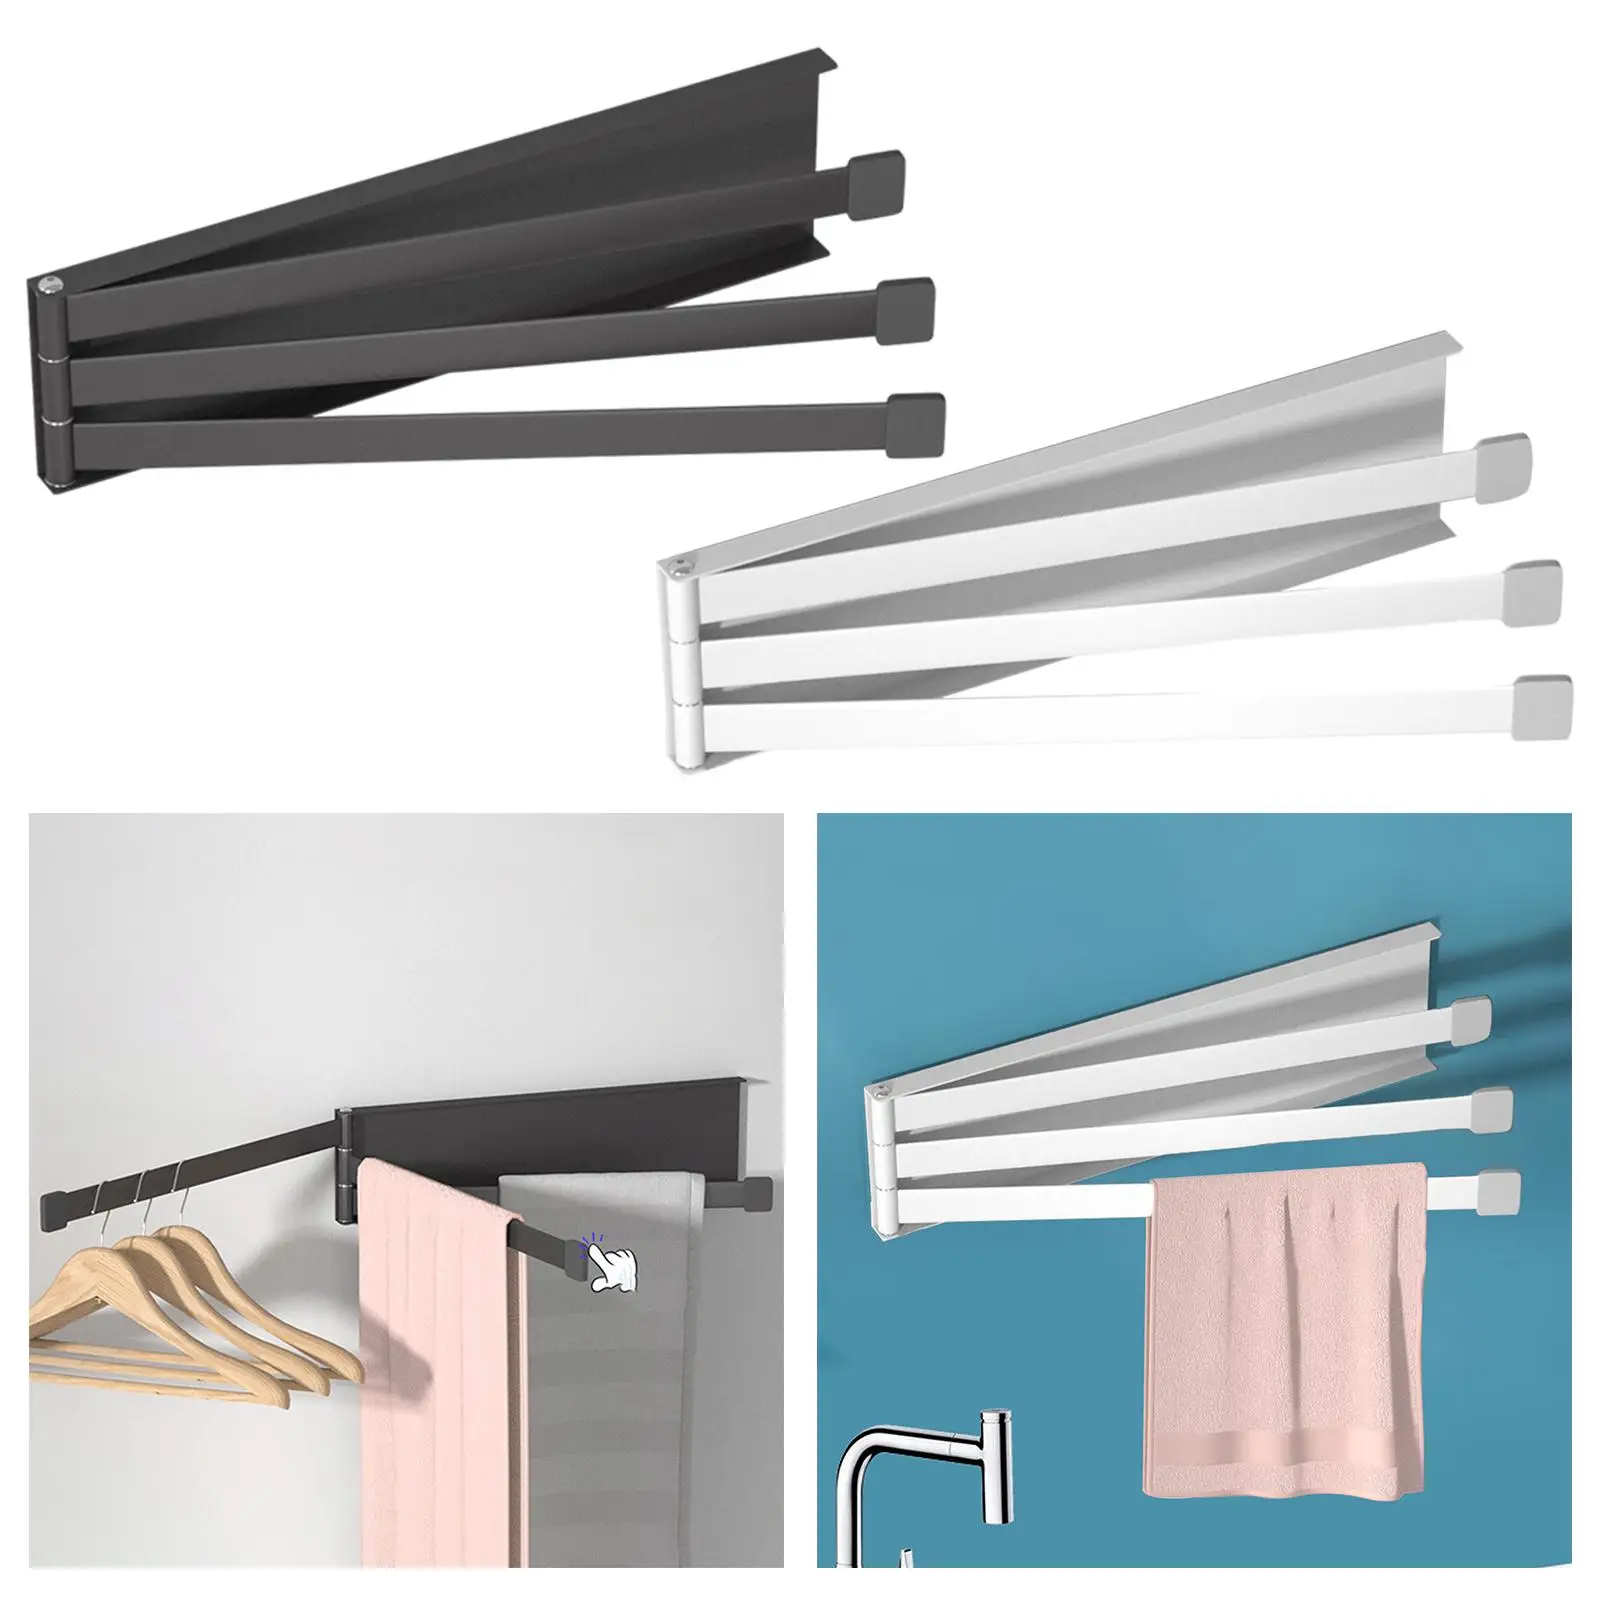 Swivel Towel Bar Hanger Organizer 180 Rotation Wall Mounted Rail Steel with 3 Arms Holder Rack for Bathroom Accessories Kitchen